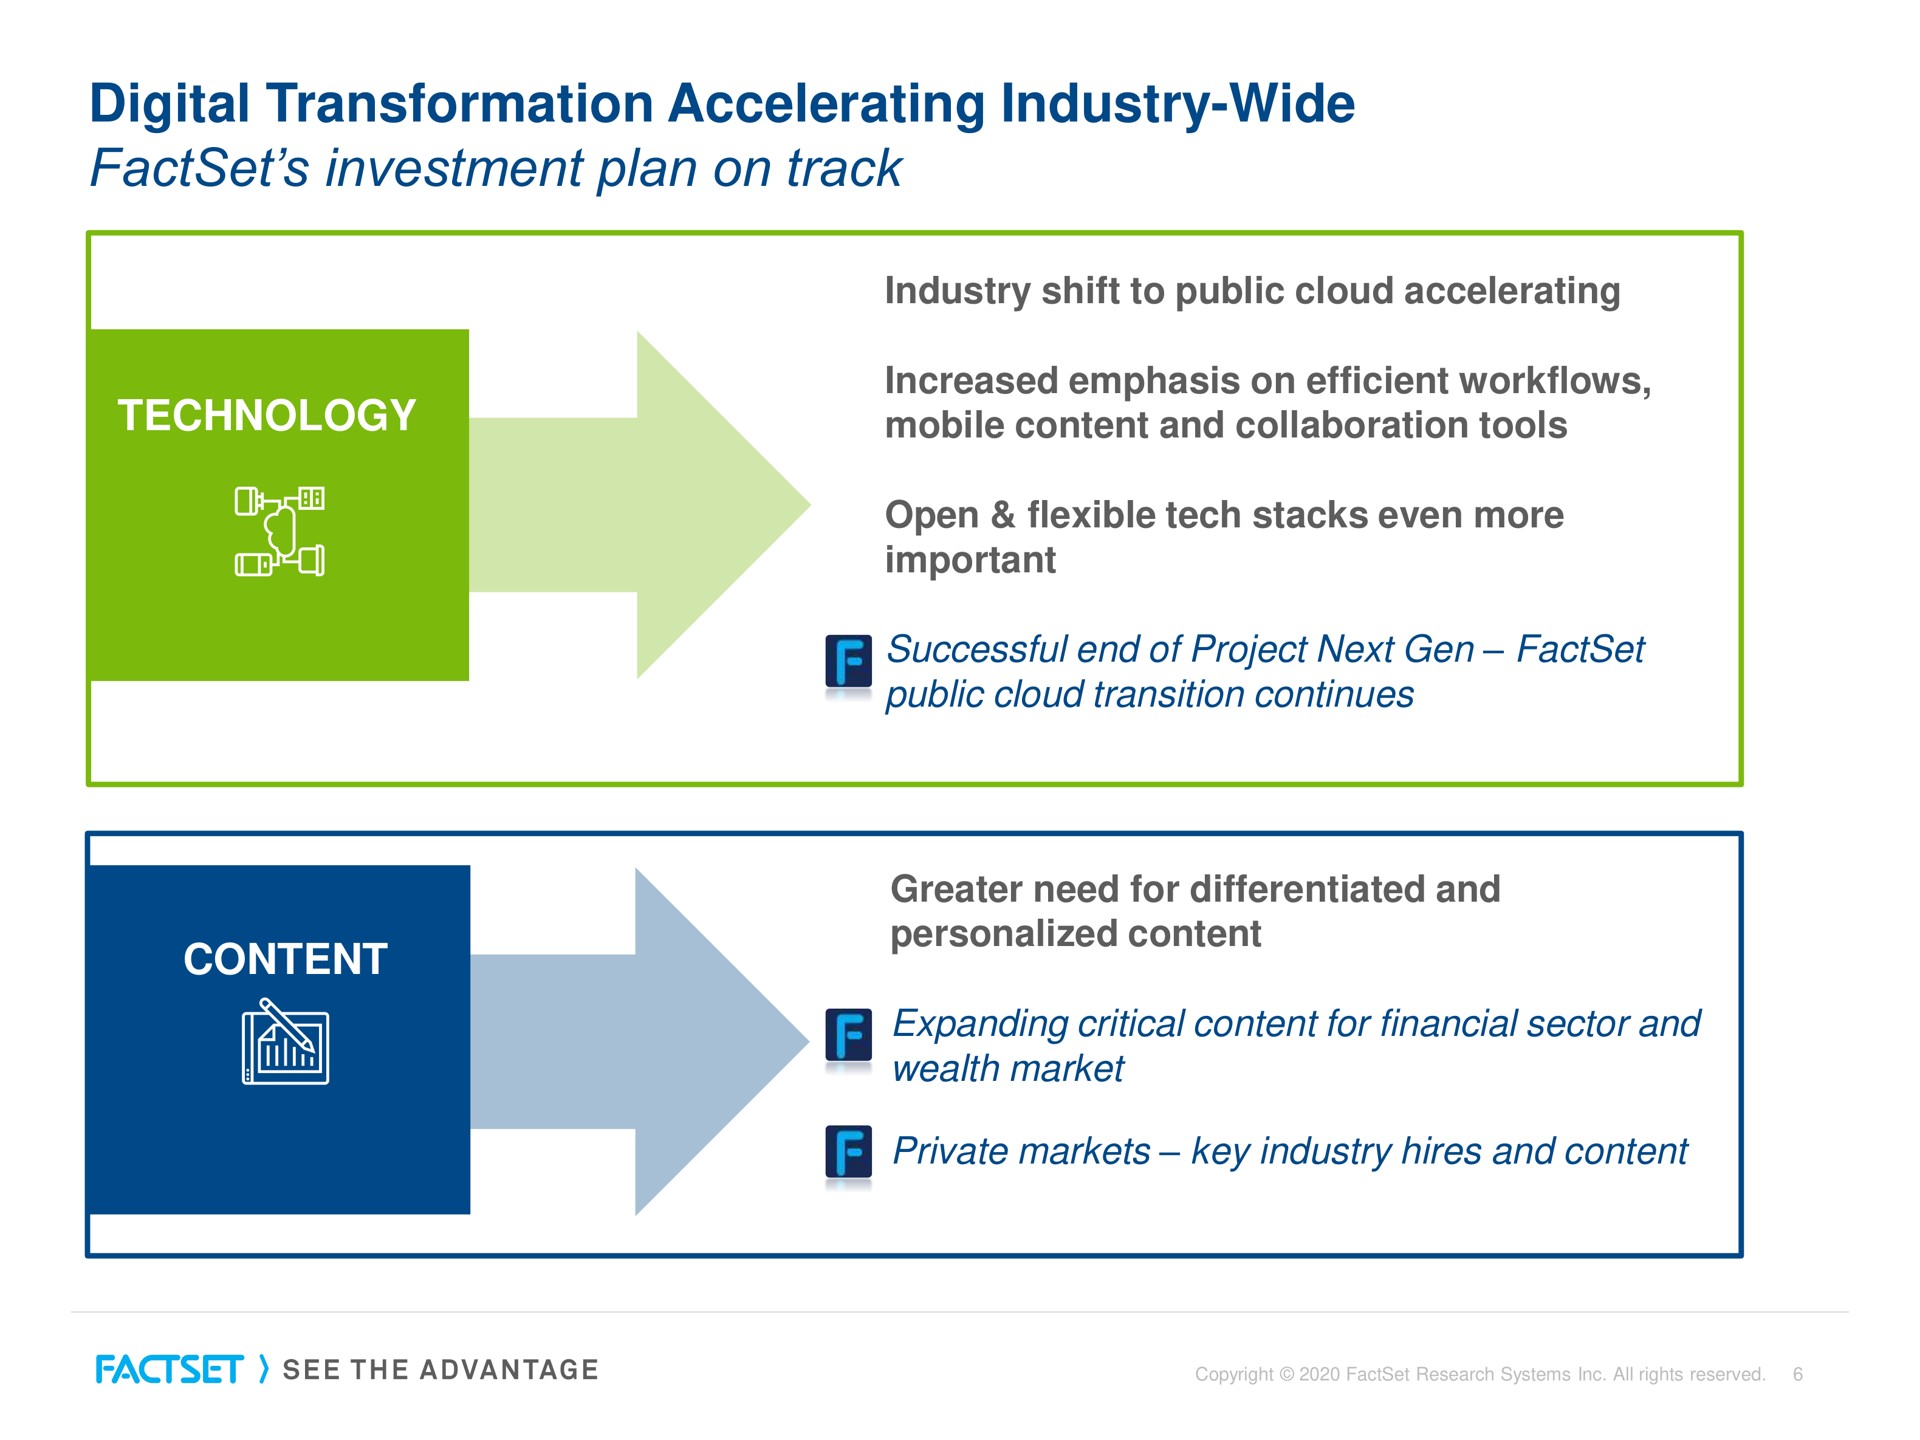 digital transformation accelerating industry wide investment plan on track | Factset